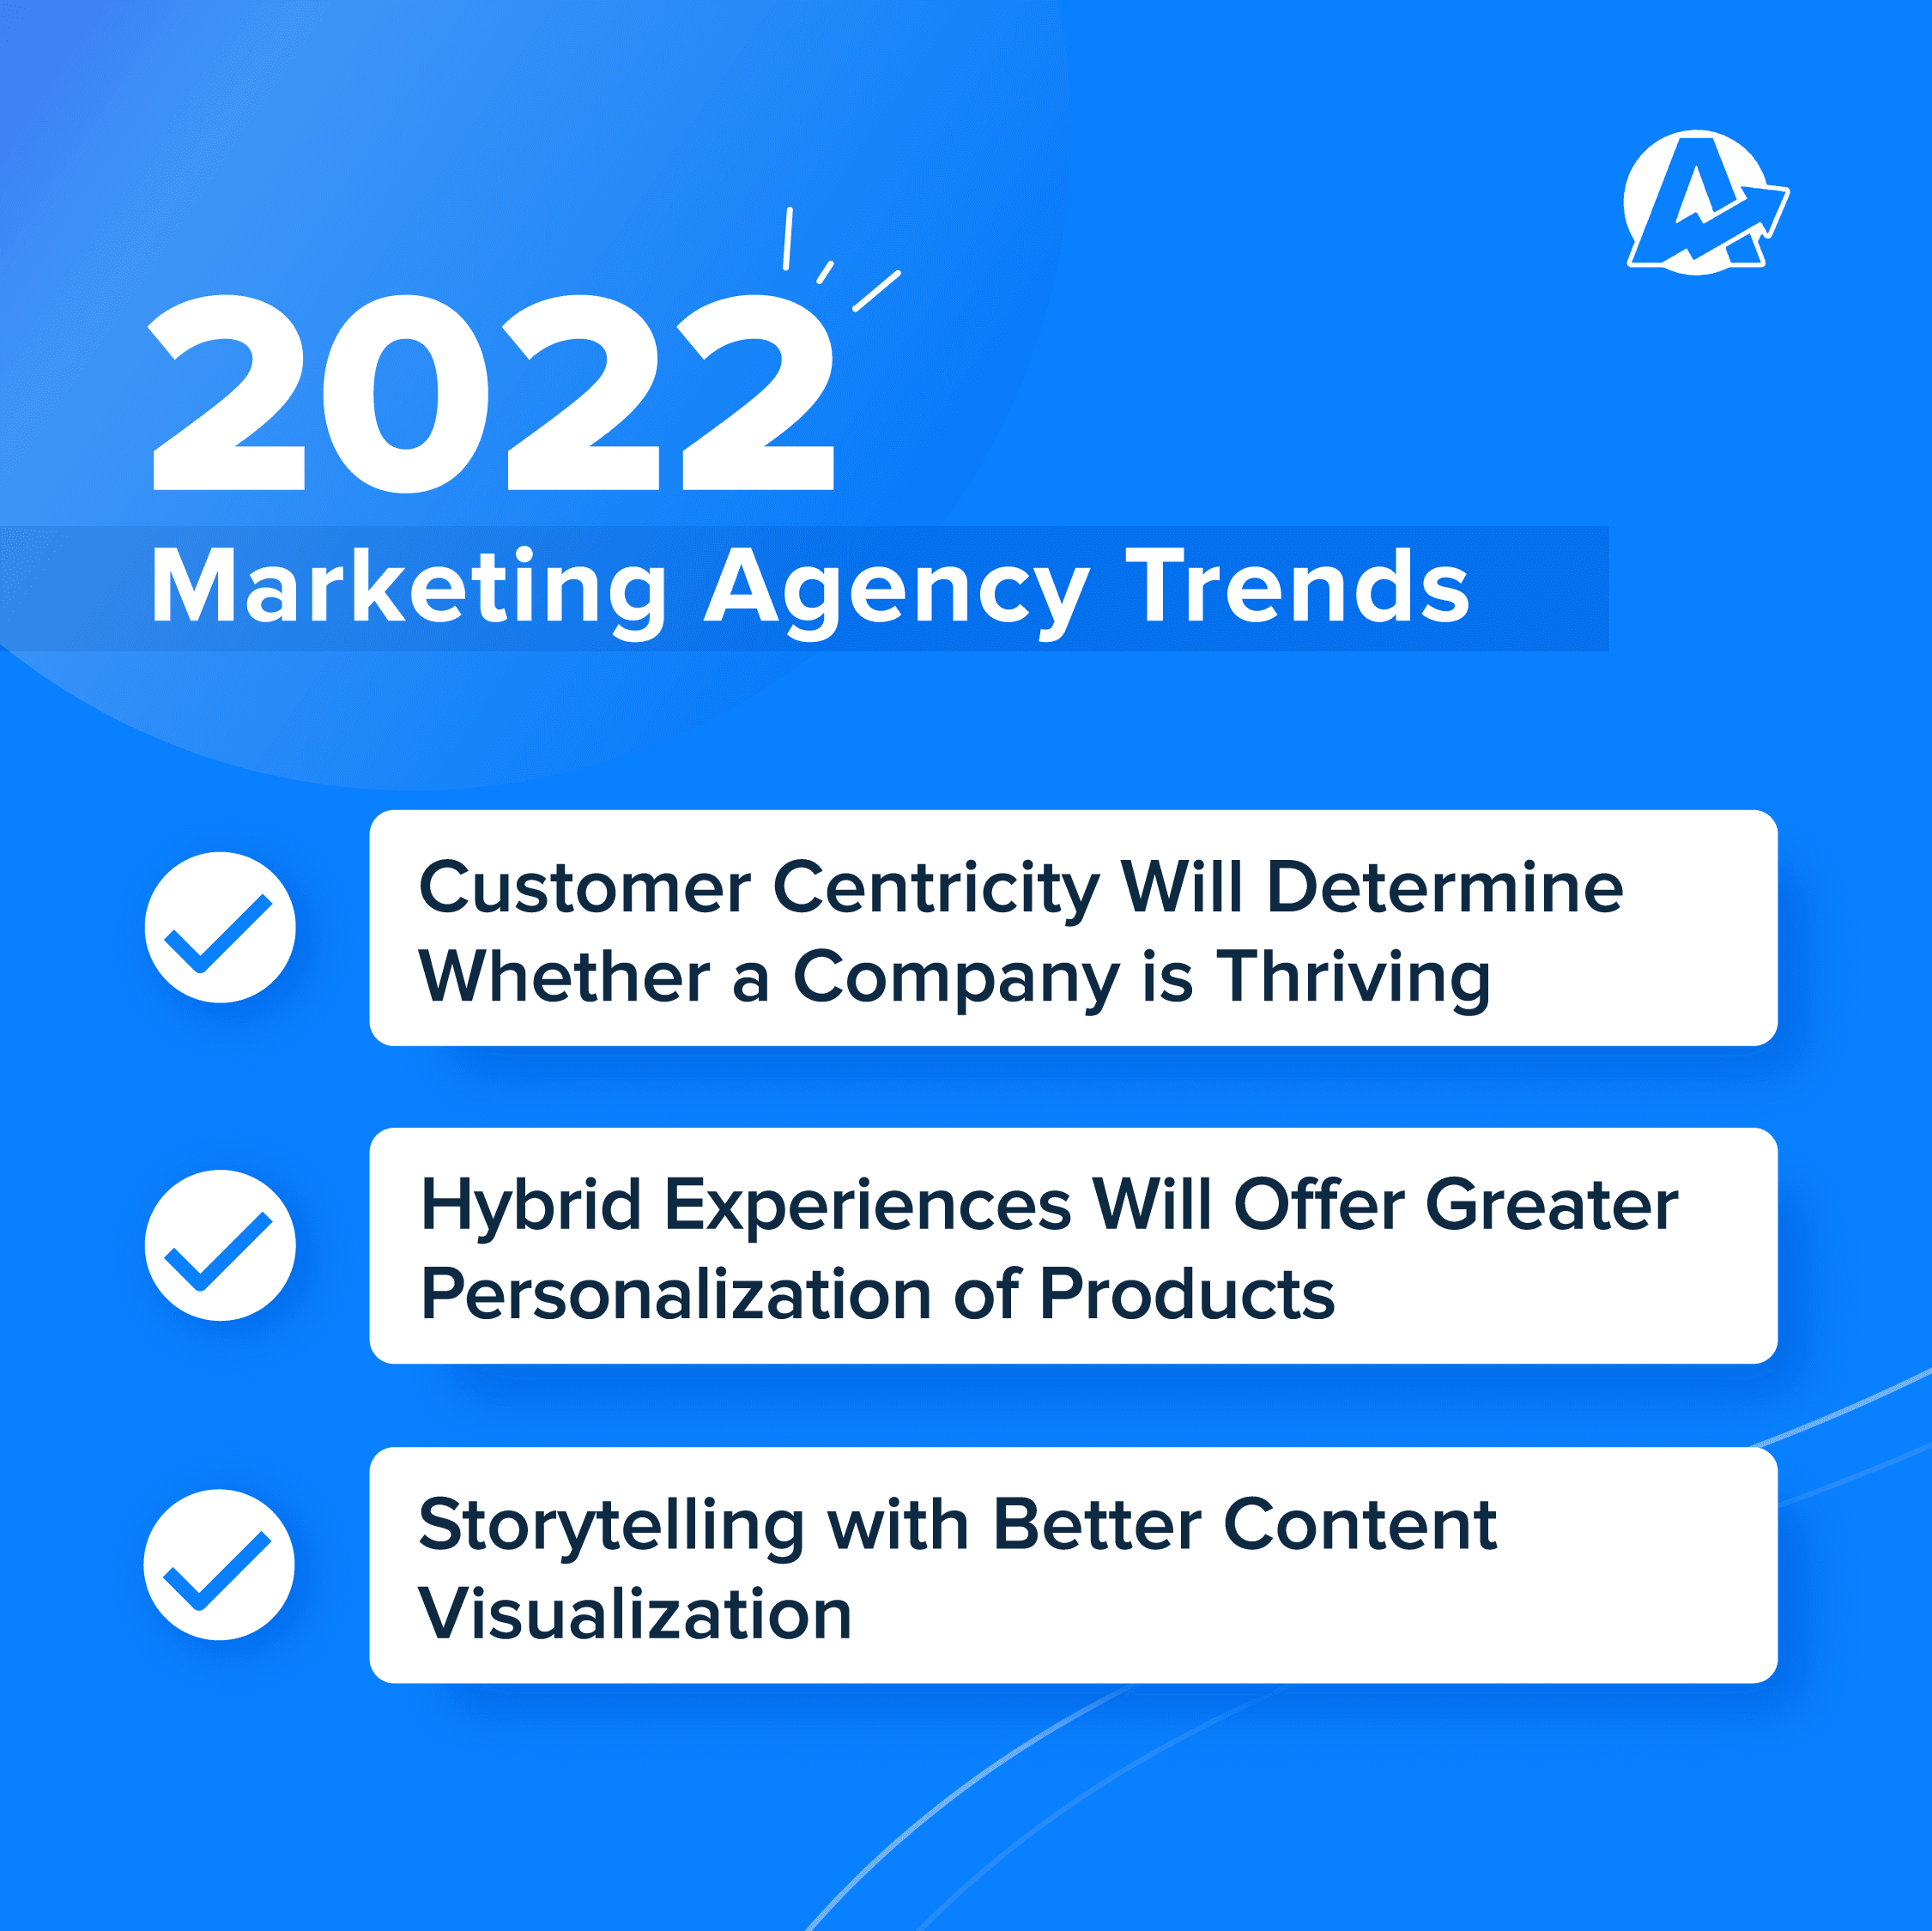 Top 3 Marketing Agency Trends for 2022